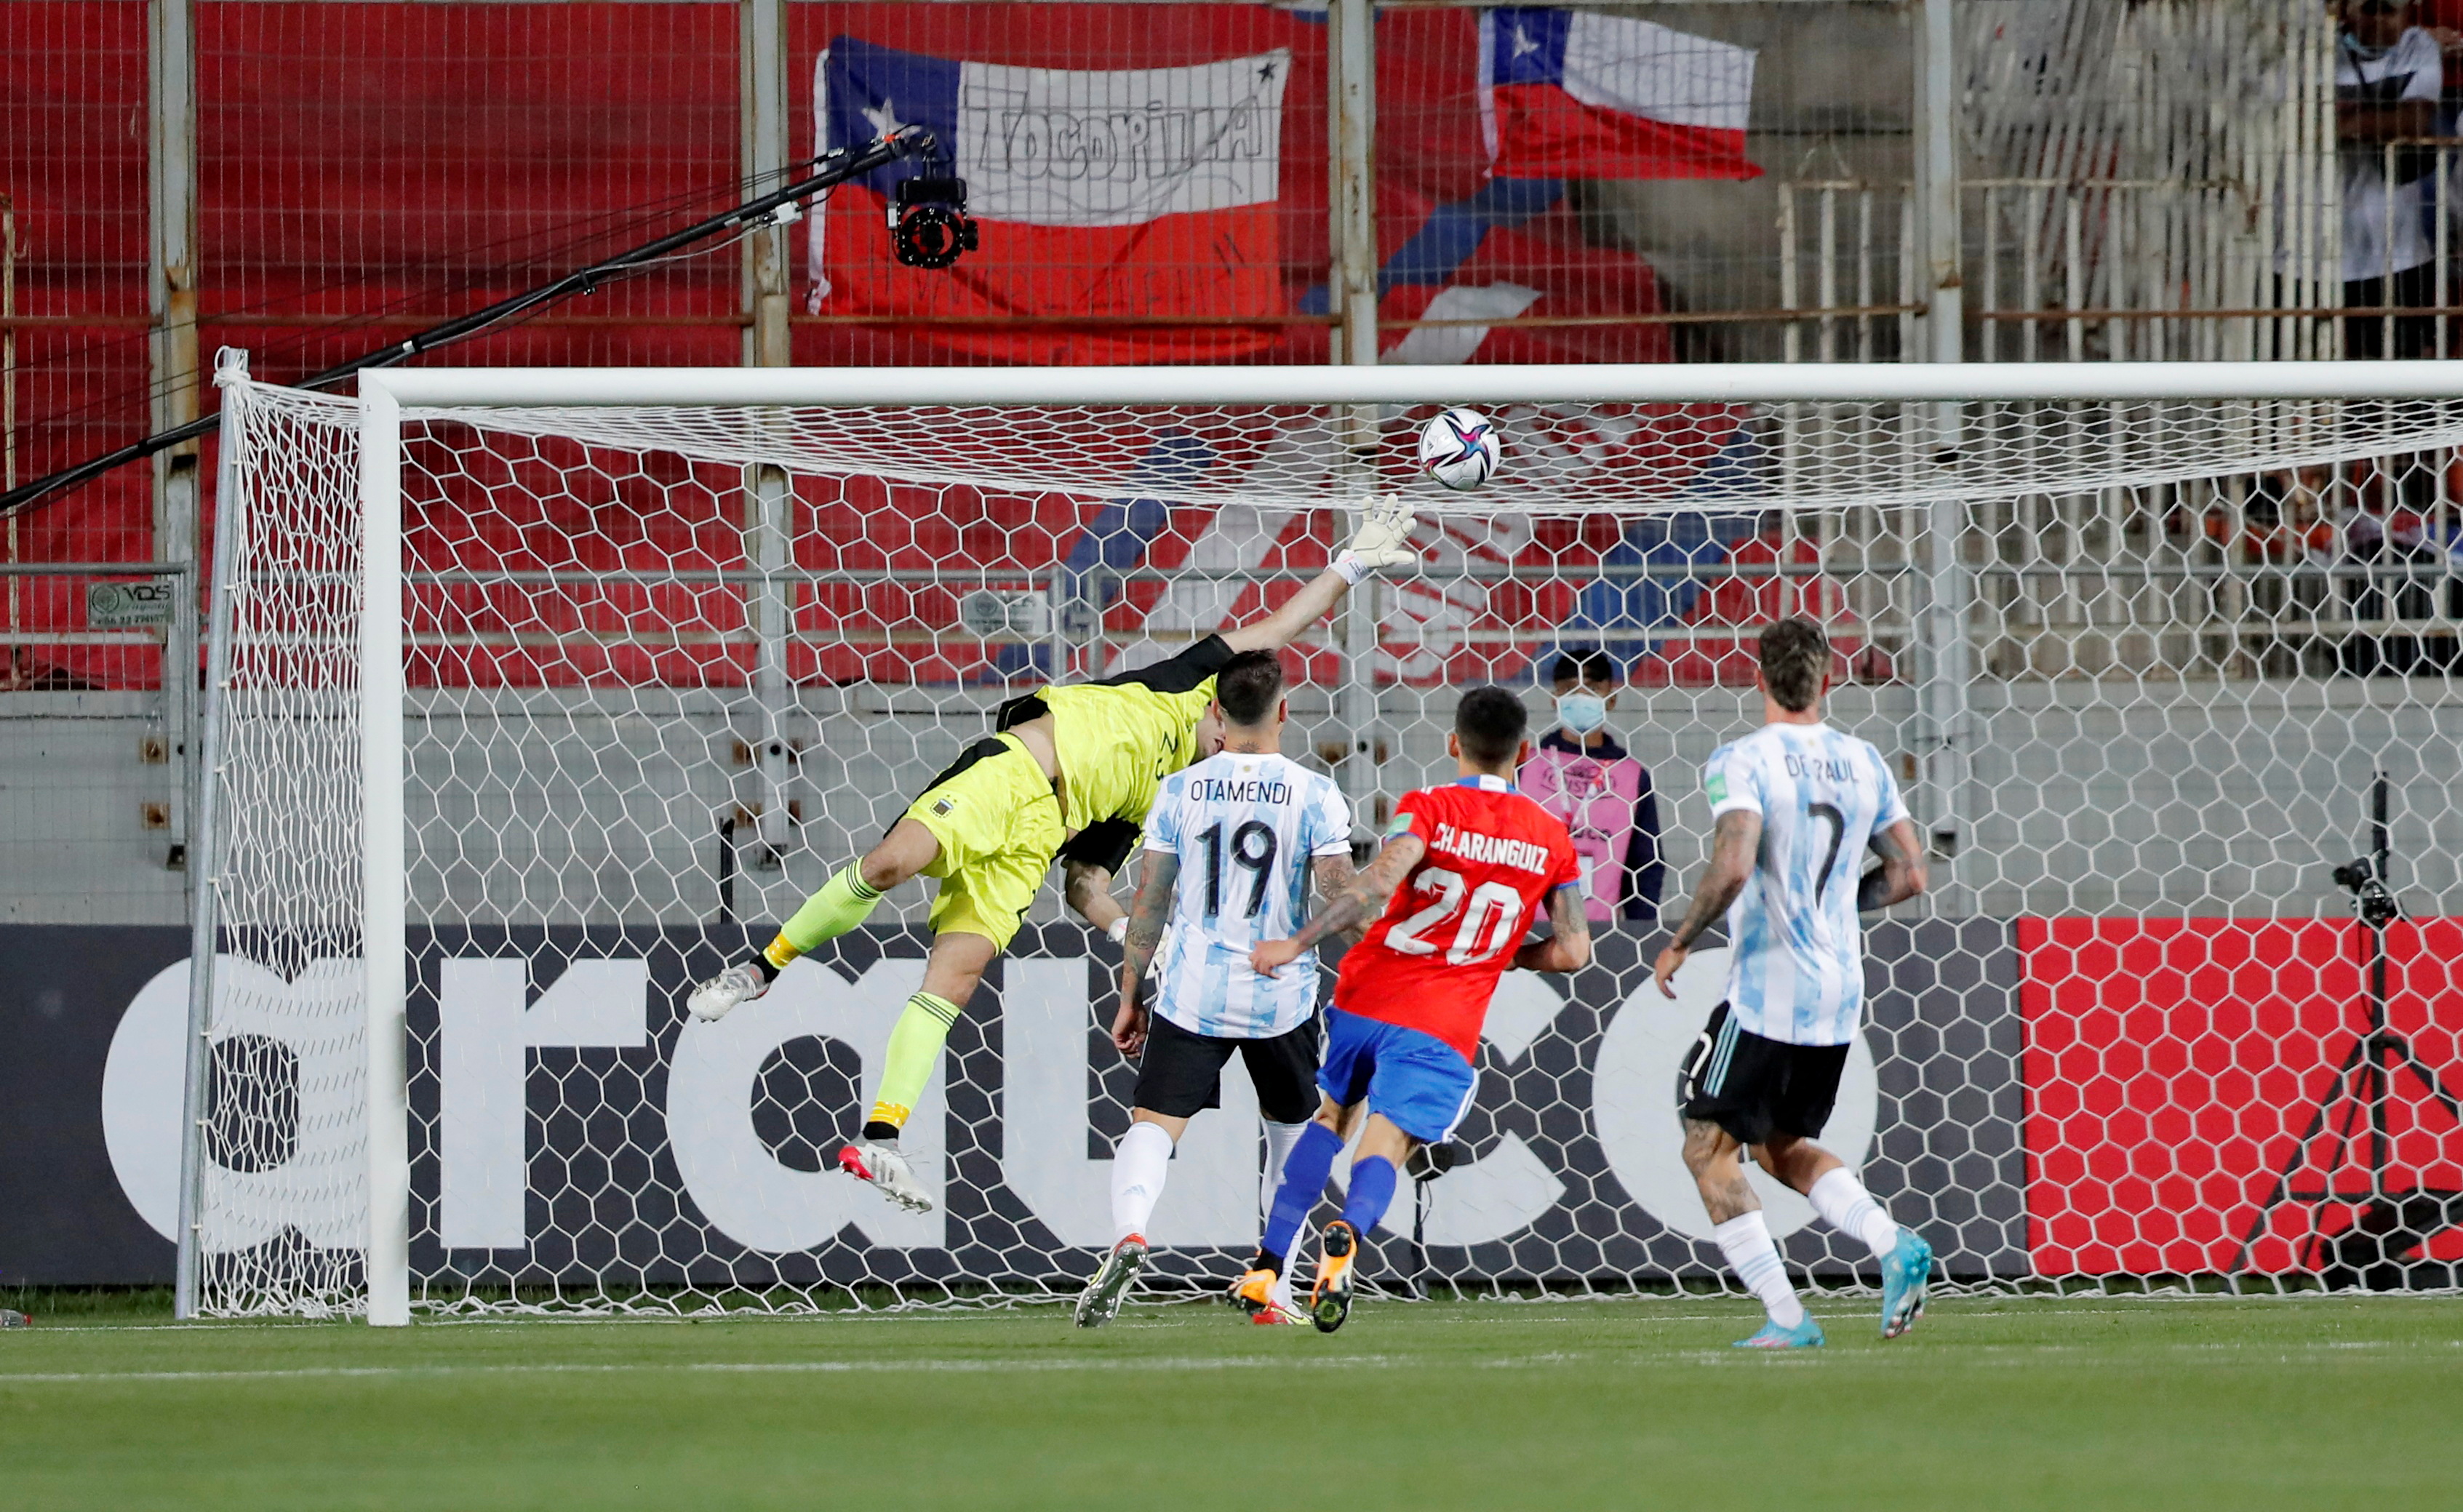 Soccer Football - World Cup - South American Qualifiers - Chile v Argentina - Estadio Zorros del Desierto, Calama, Chile - January 27, 2022 Chile's Ben Brereton (not pictured) scores their first goal  Pool via REUTERS/Javier Torres